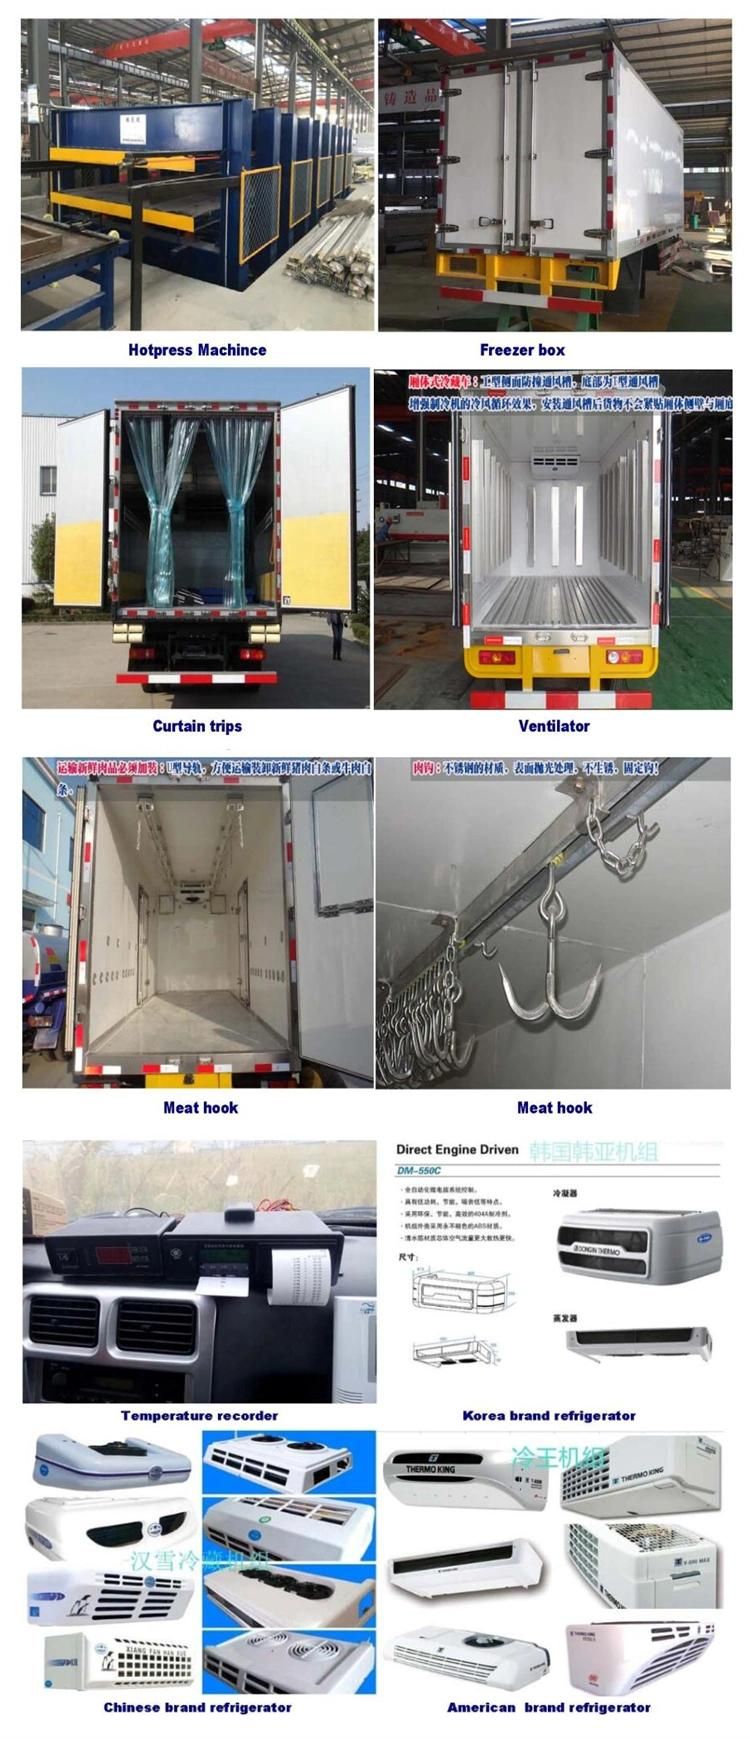 10 Tonnes to 15 Tonnes Honyan Refrigerated Freezer Vehicle with Thermo King Refrigerator